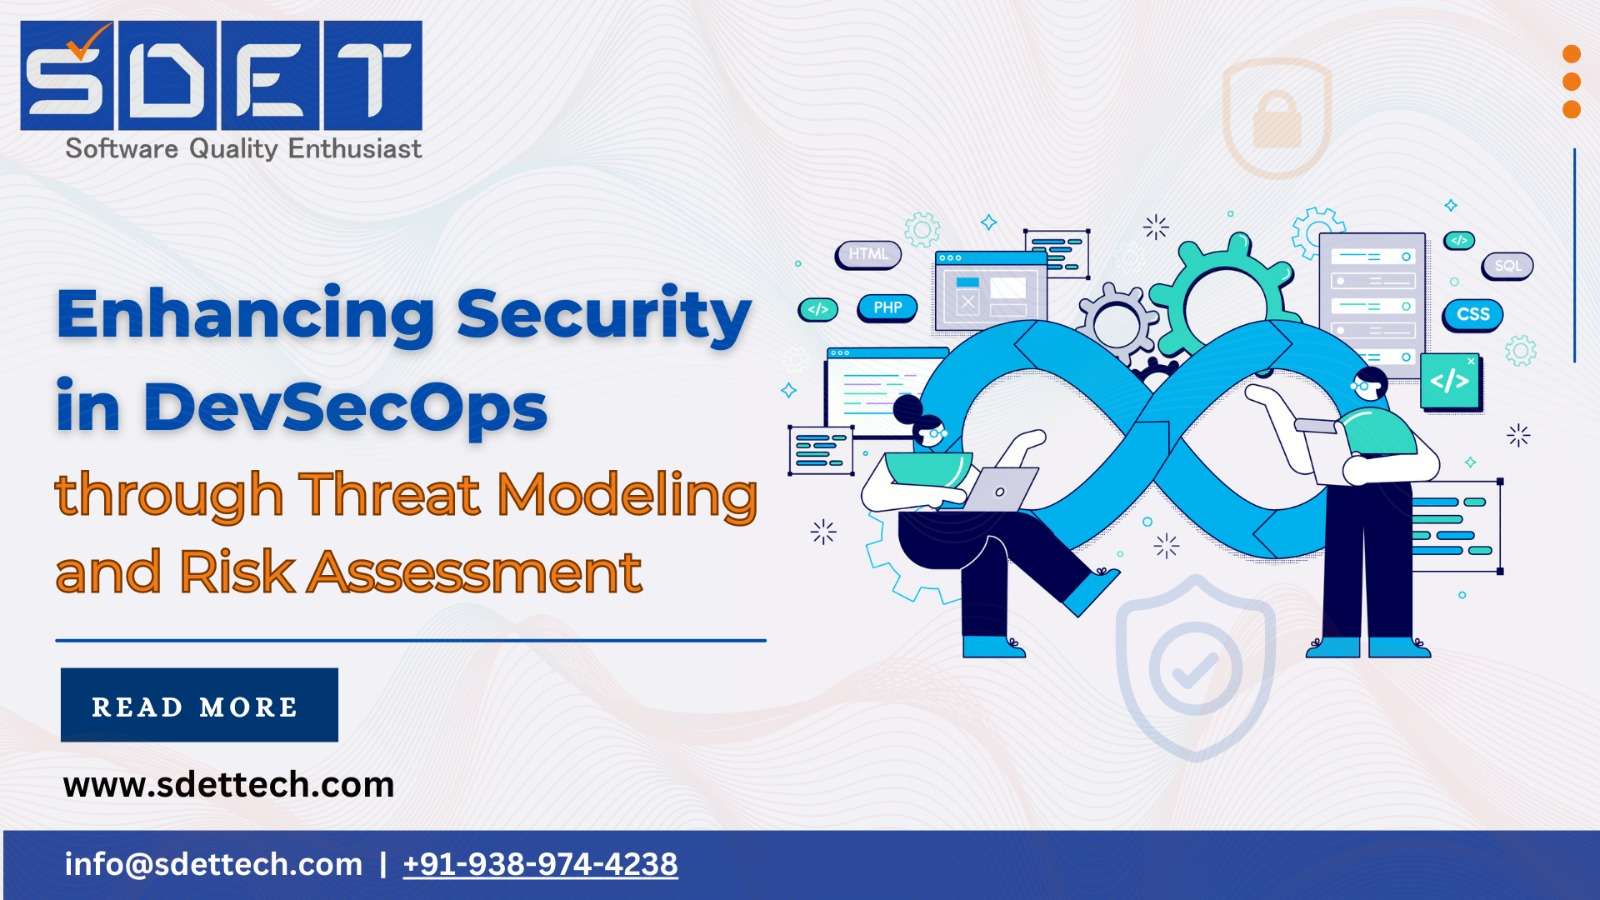 Enhancing Security in DevSecOps through Threat Modeling and Risk Assessment